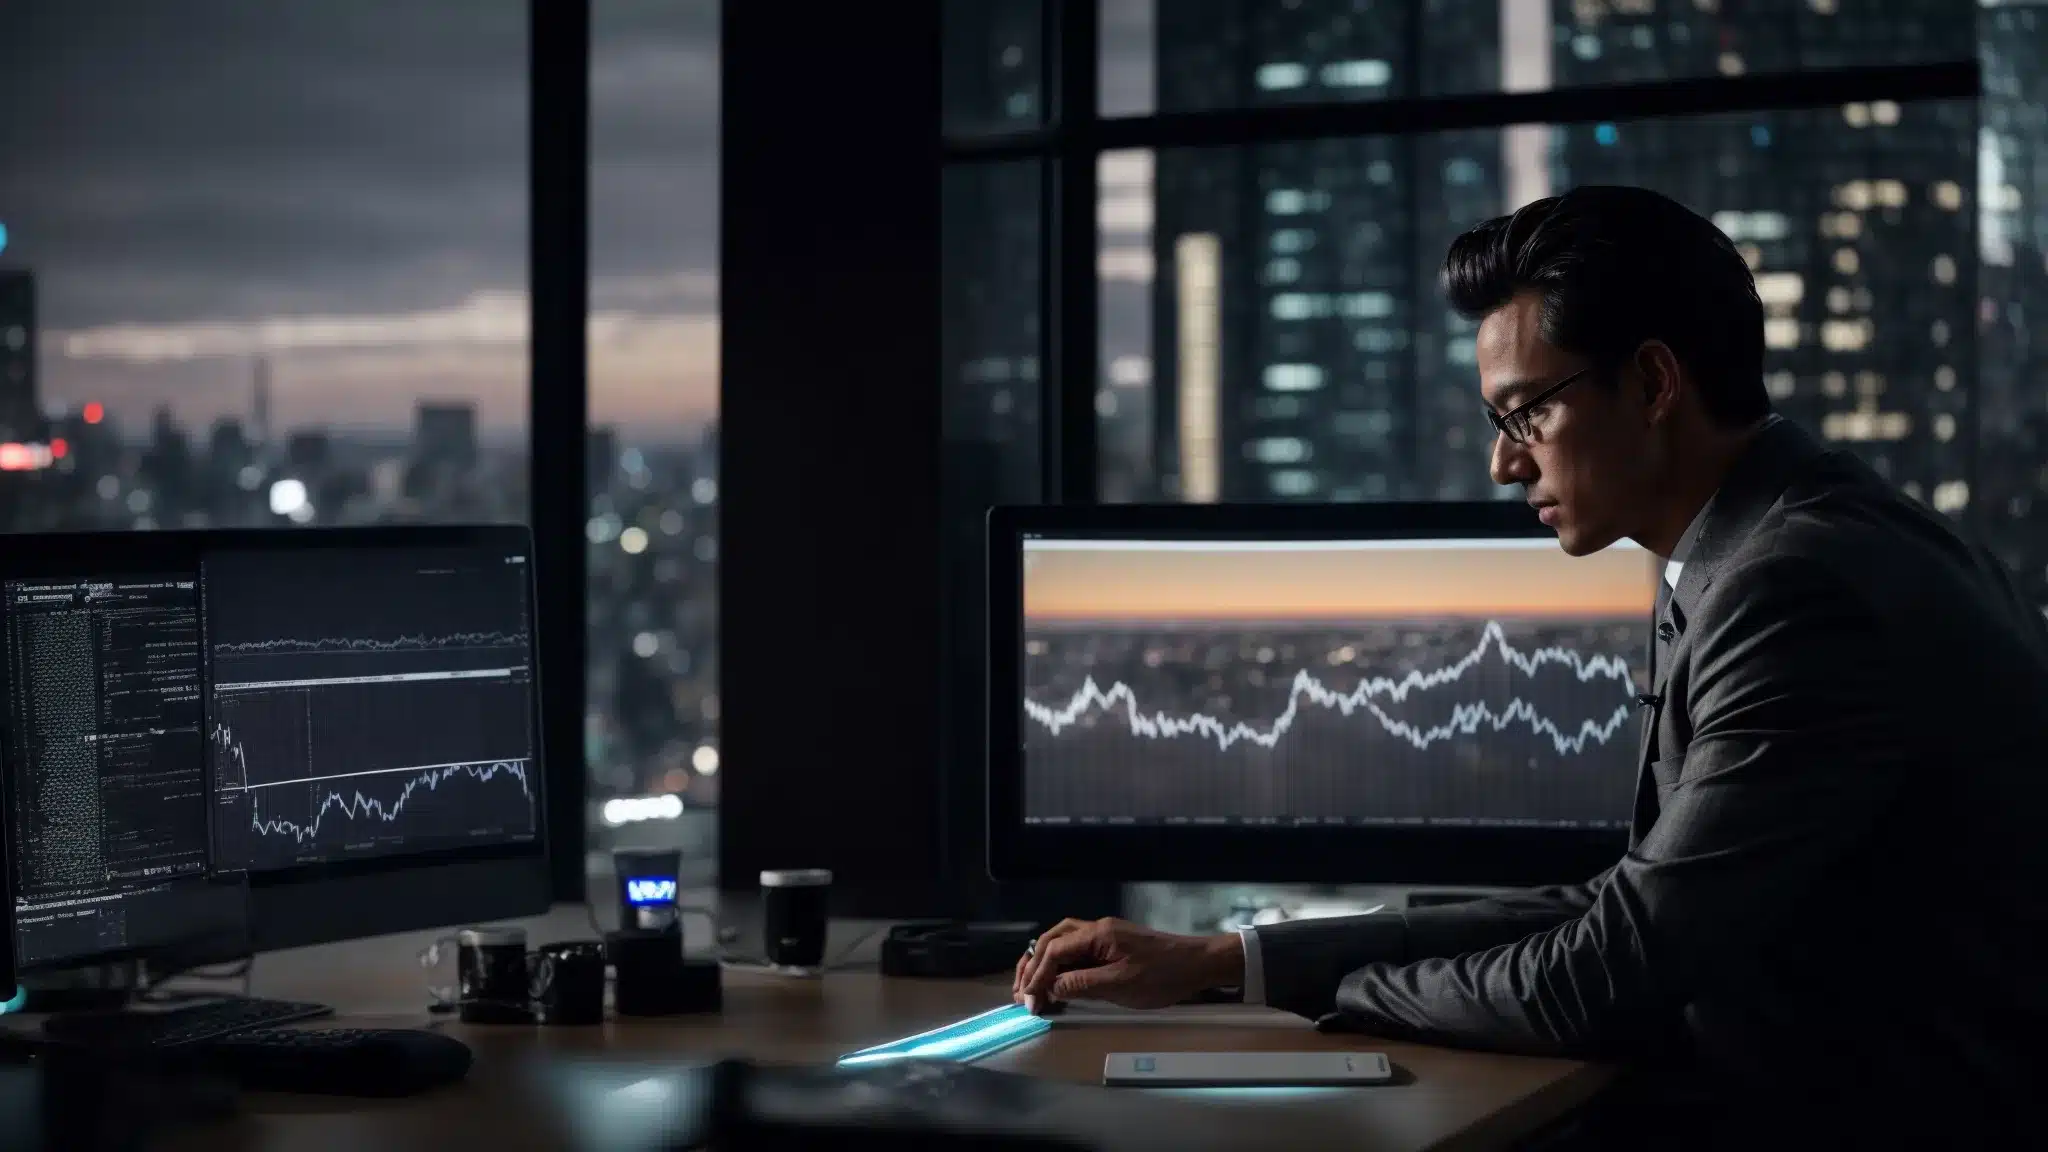 A Marketer Analyzing Seo Data On A Computer Screen With A City Skyline In The Background.